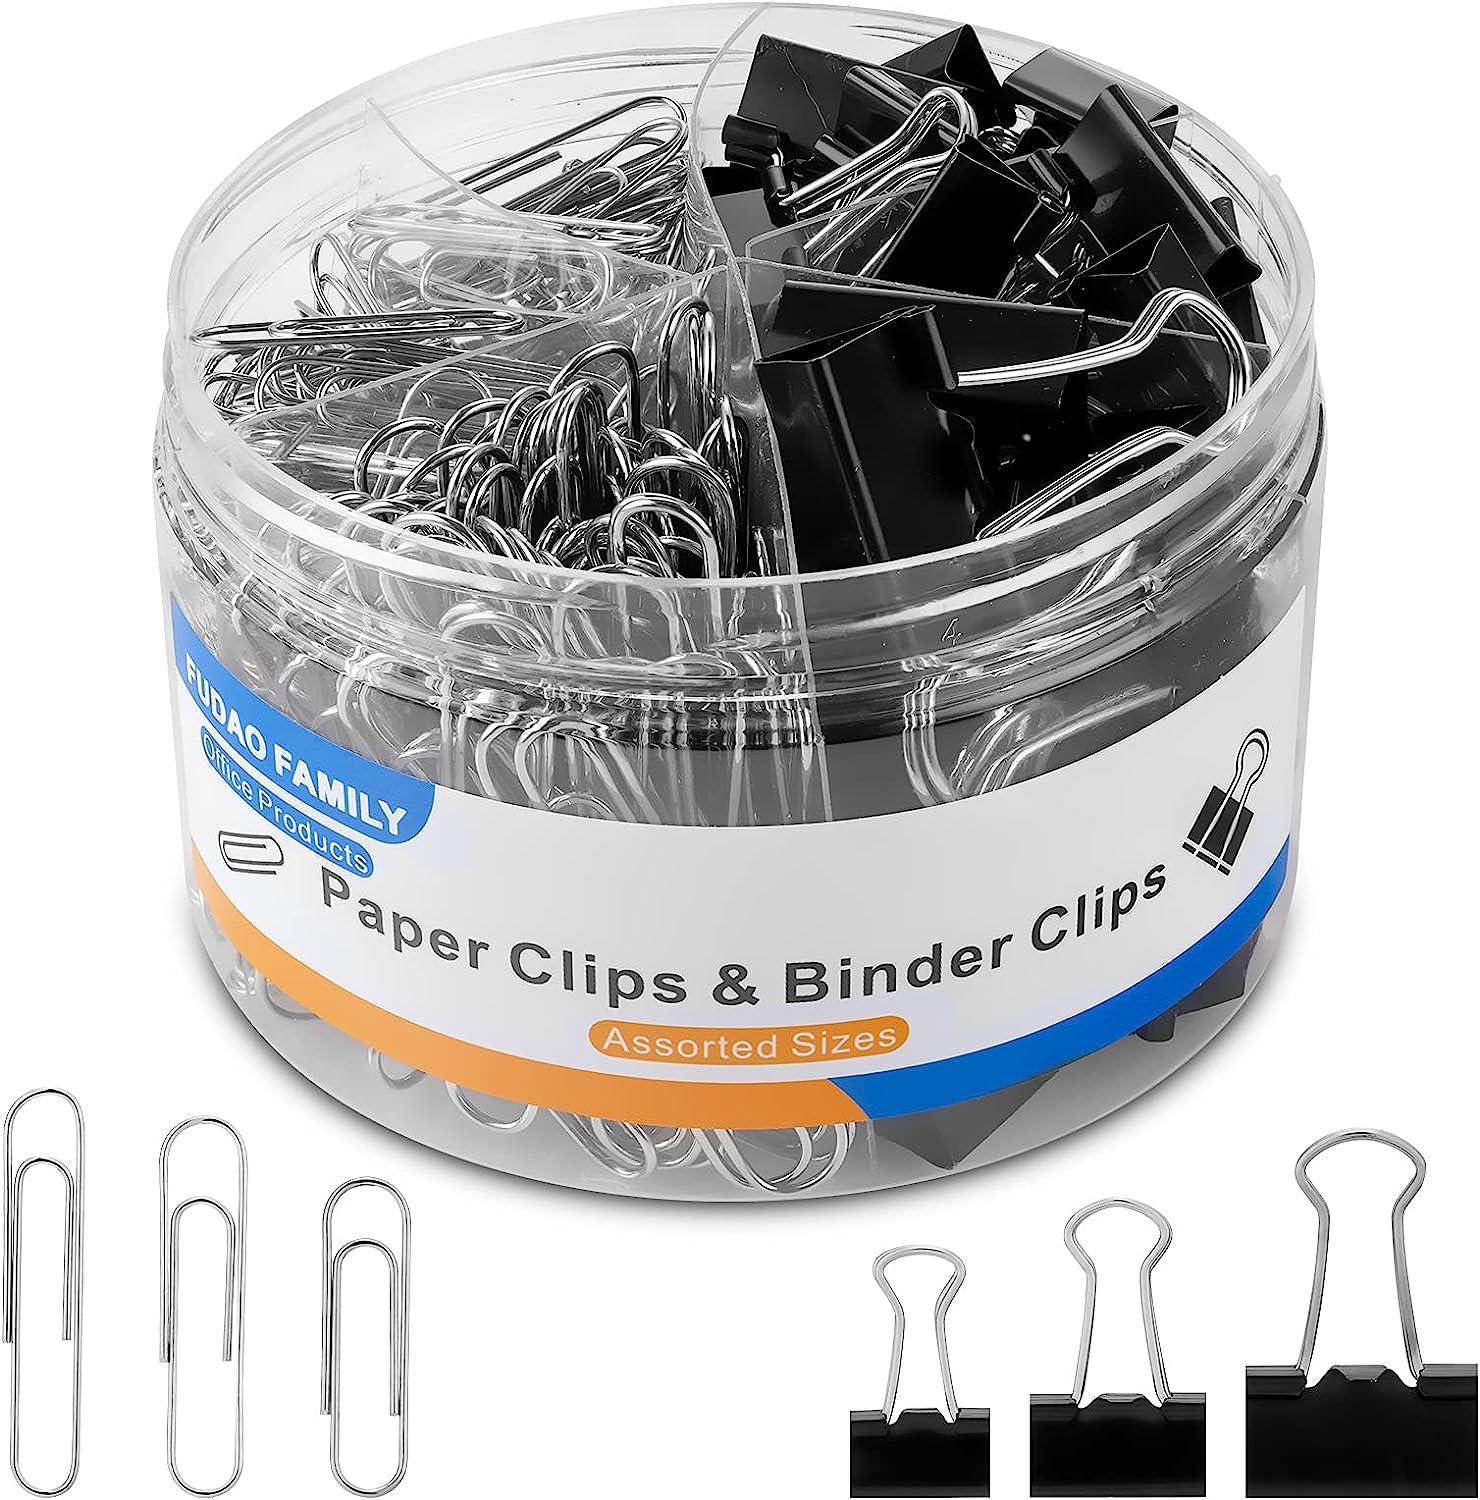 fudao family paper clips binder clips 340 pcs paper clips assorted sizes binder clips assorted sizes silver